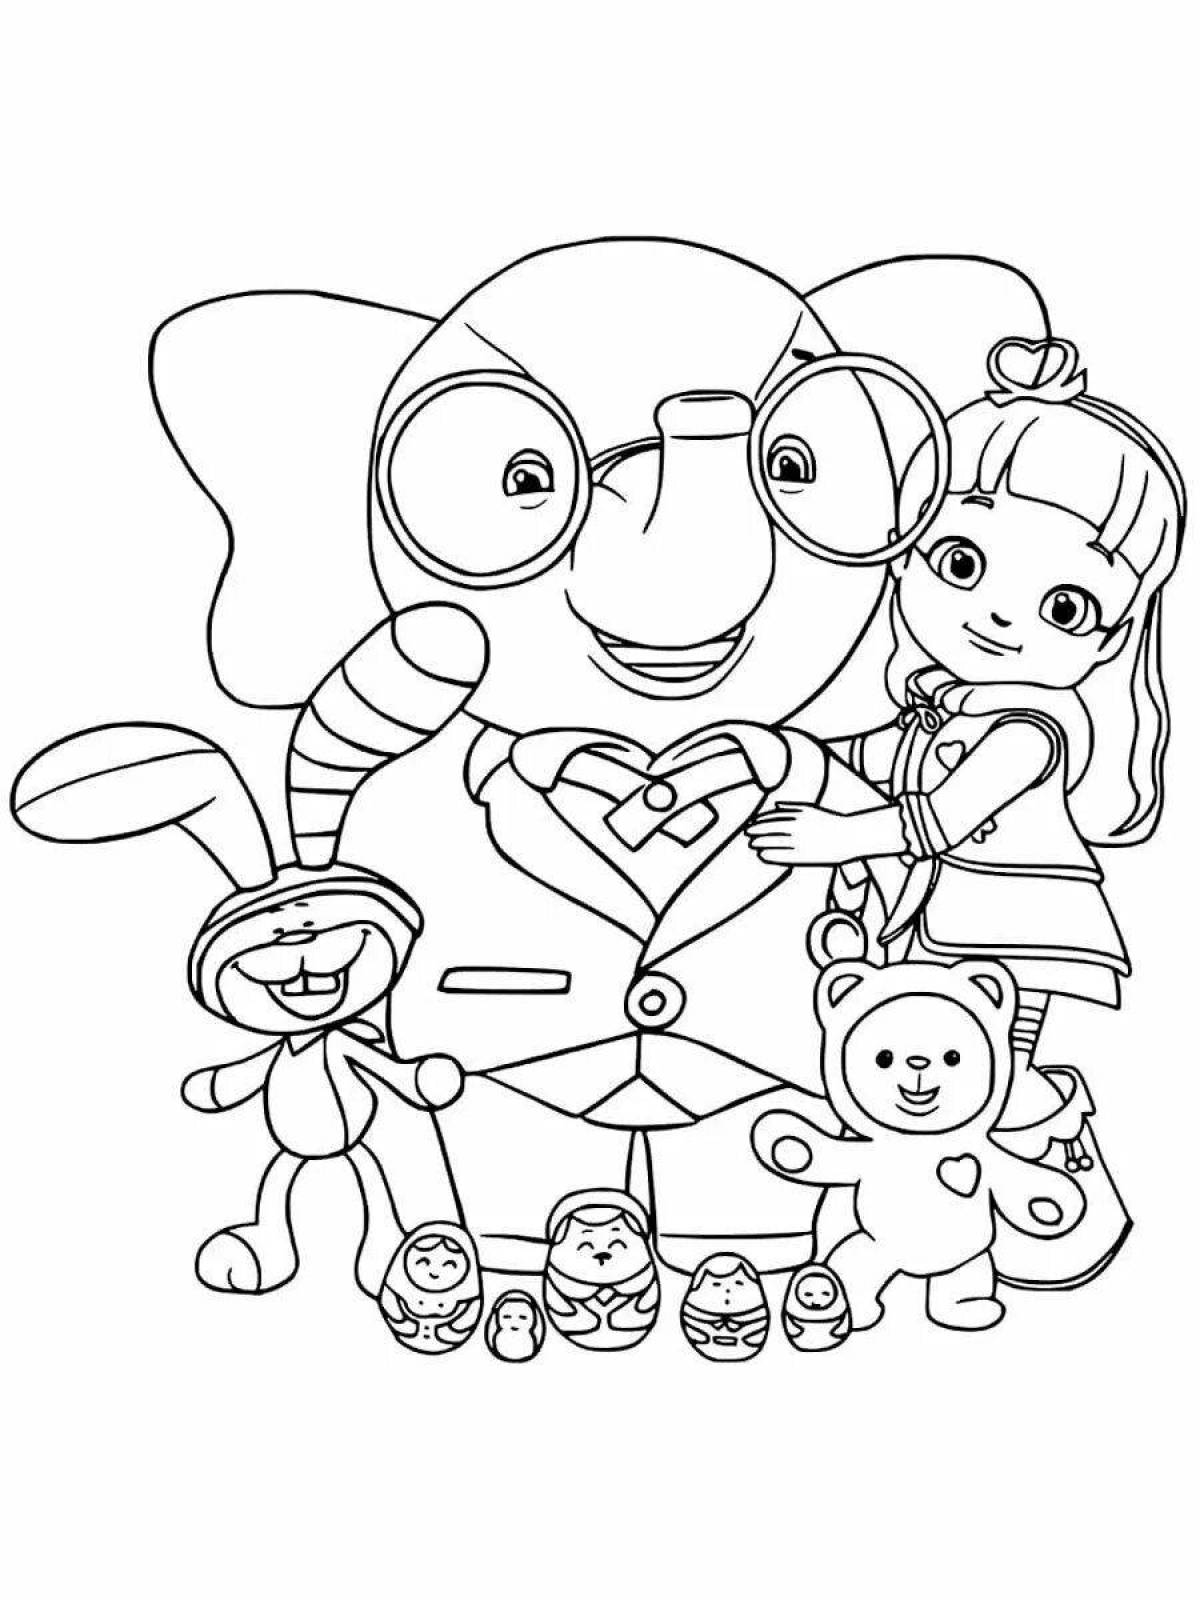 Fabulous cartoon coloring pages